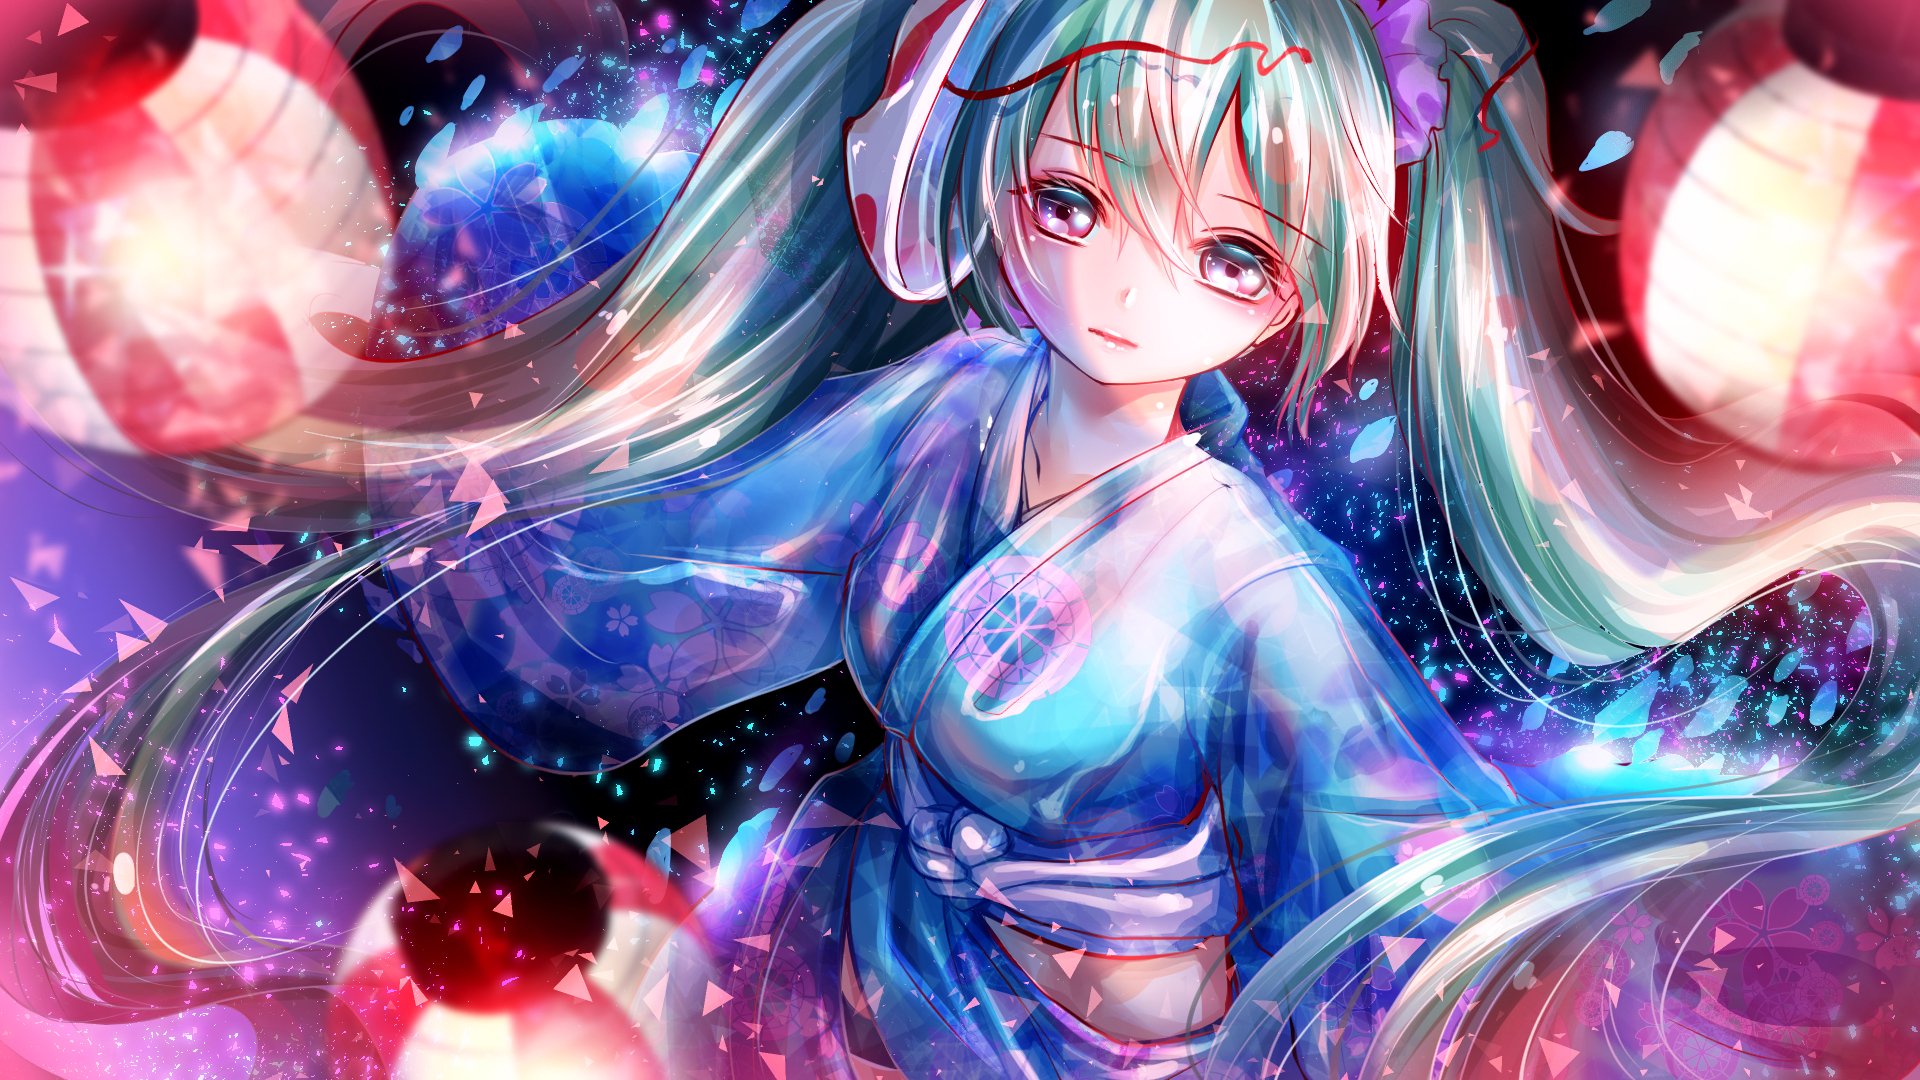 Download Hatsune Miku Long Hair Anime Vocaloid HD Wallpaper by しげむ